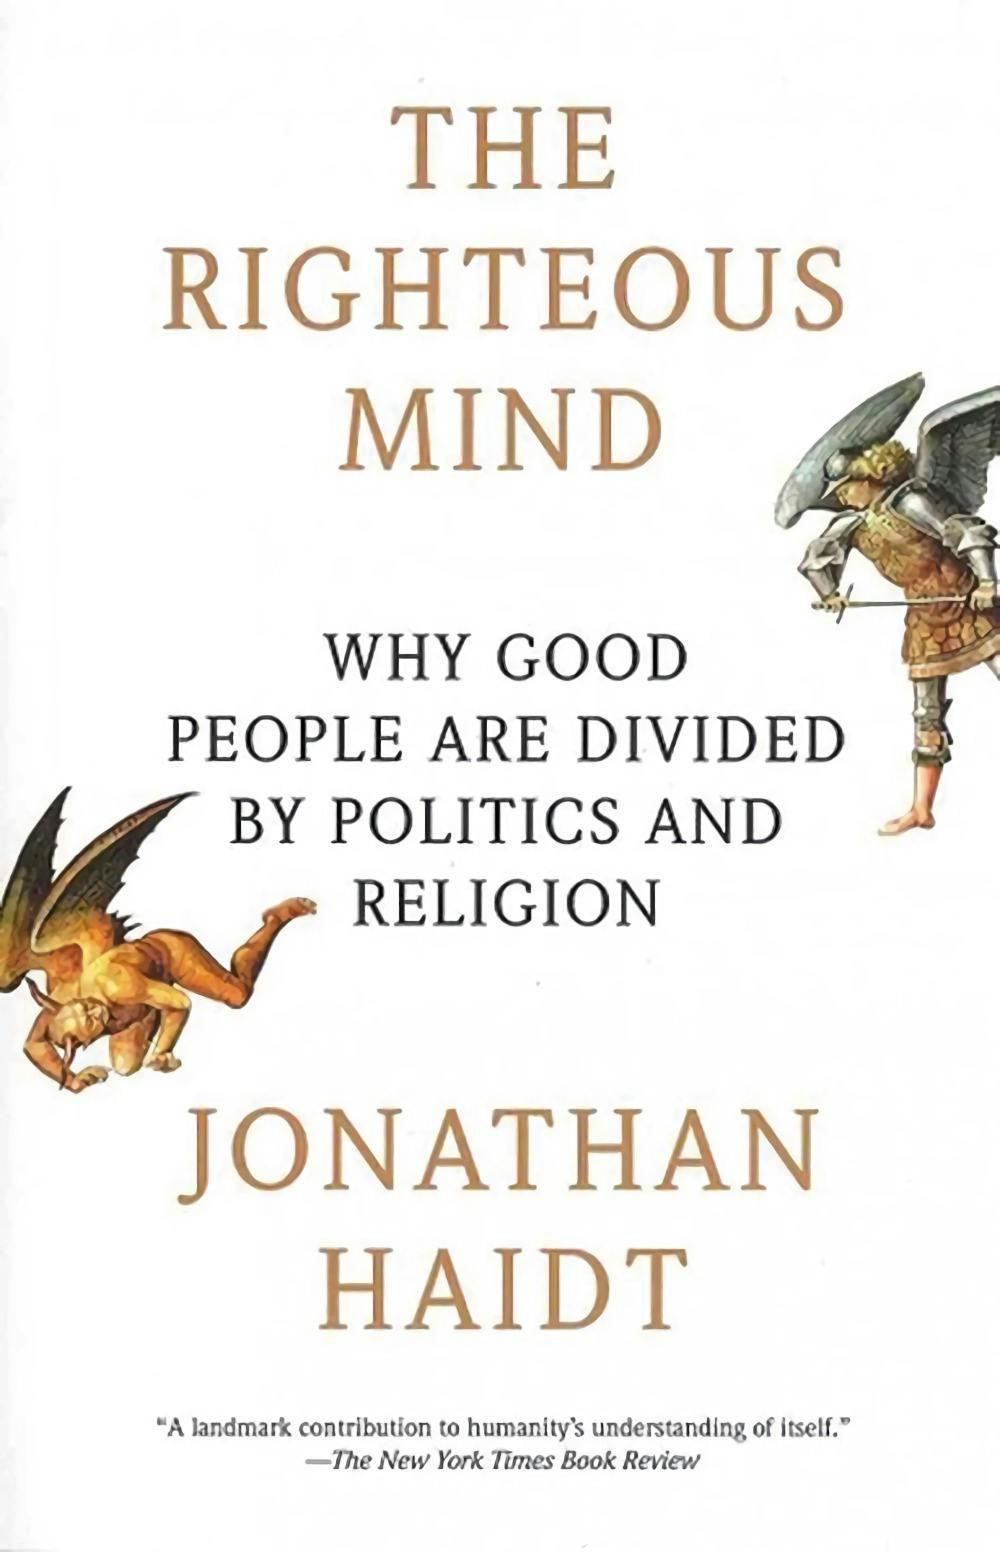 "The Righteous Mind" by "Jonathan Haidt"